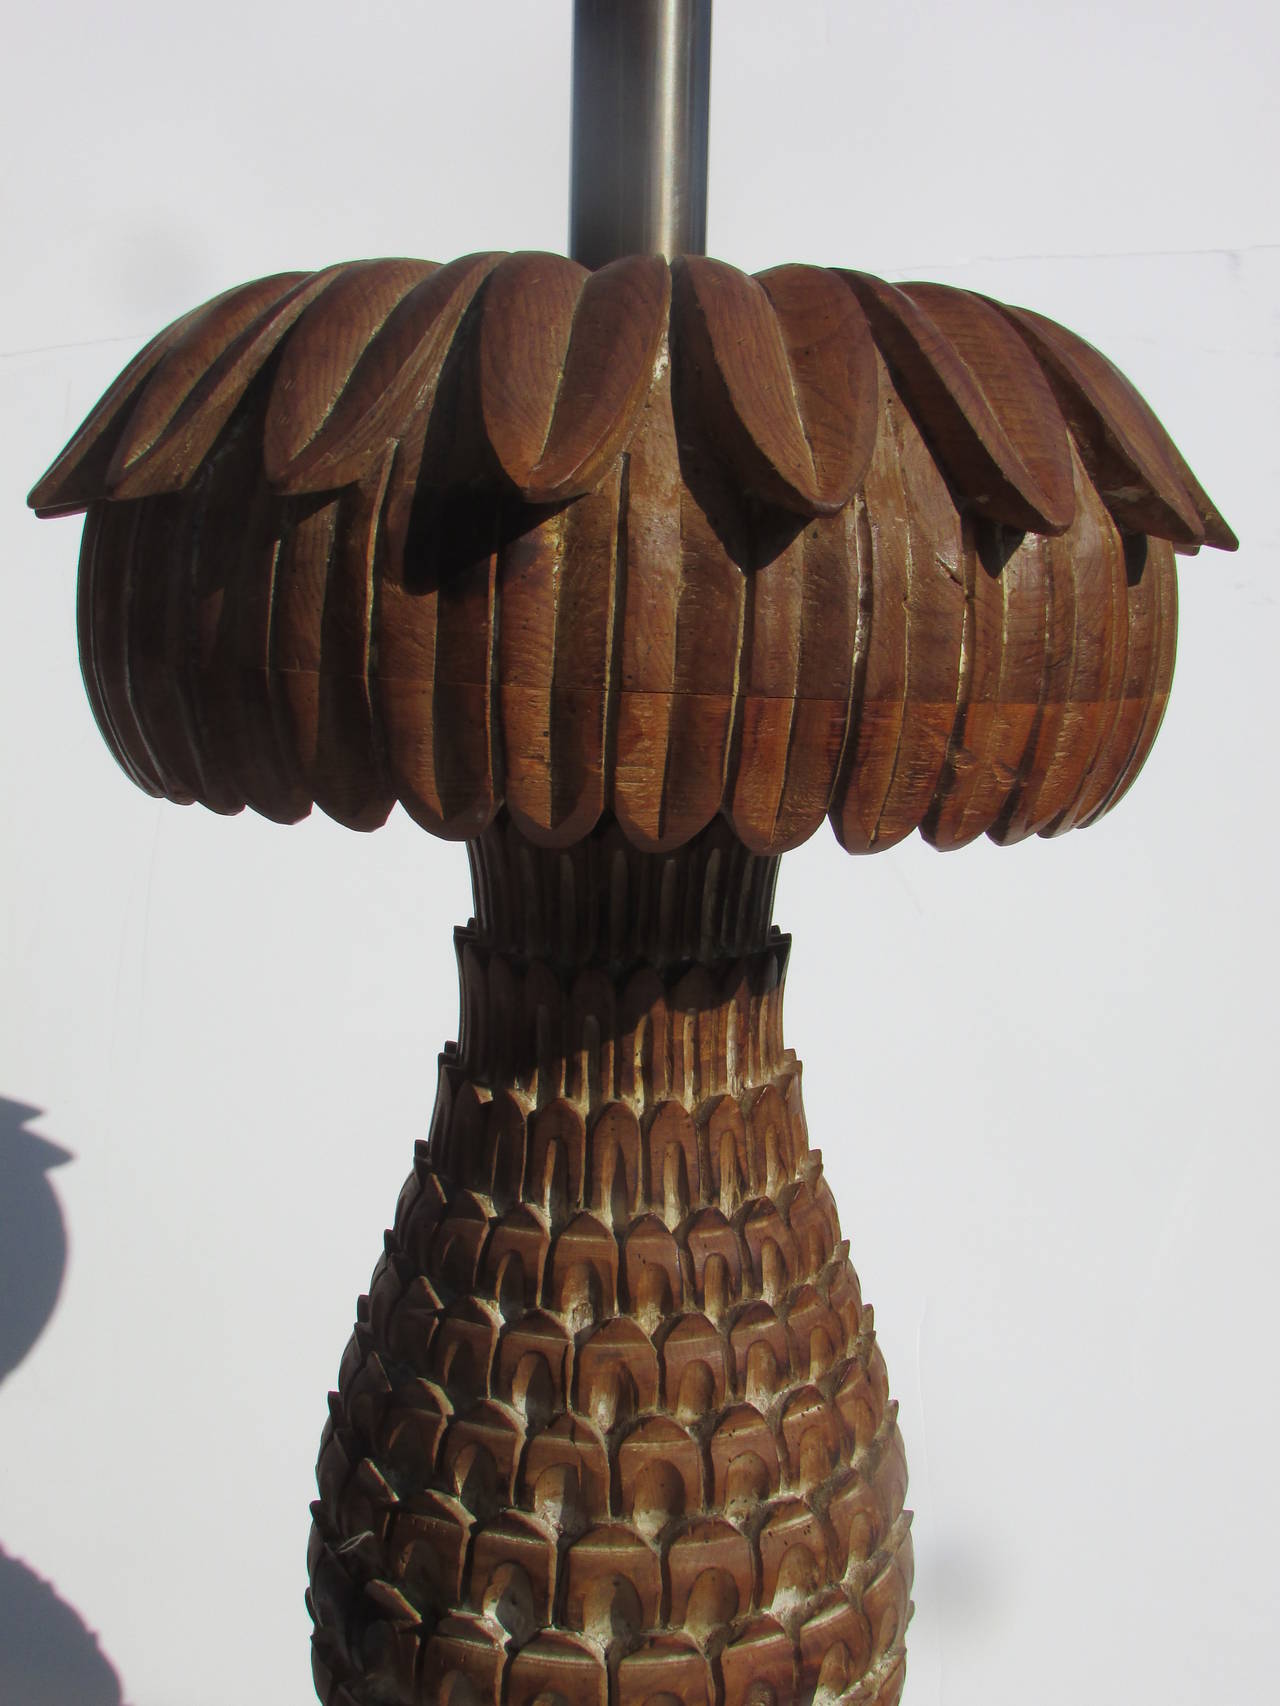 wood carved pineapple